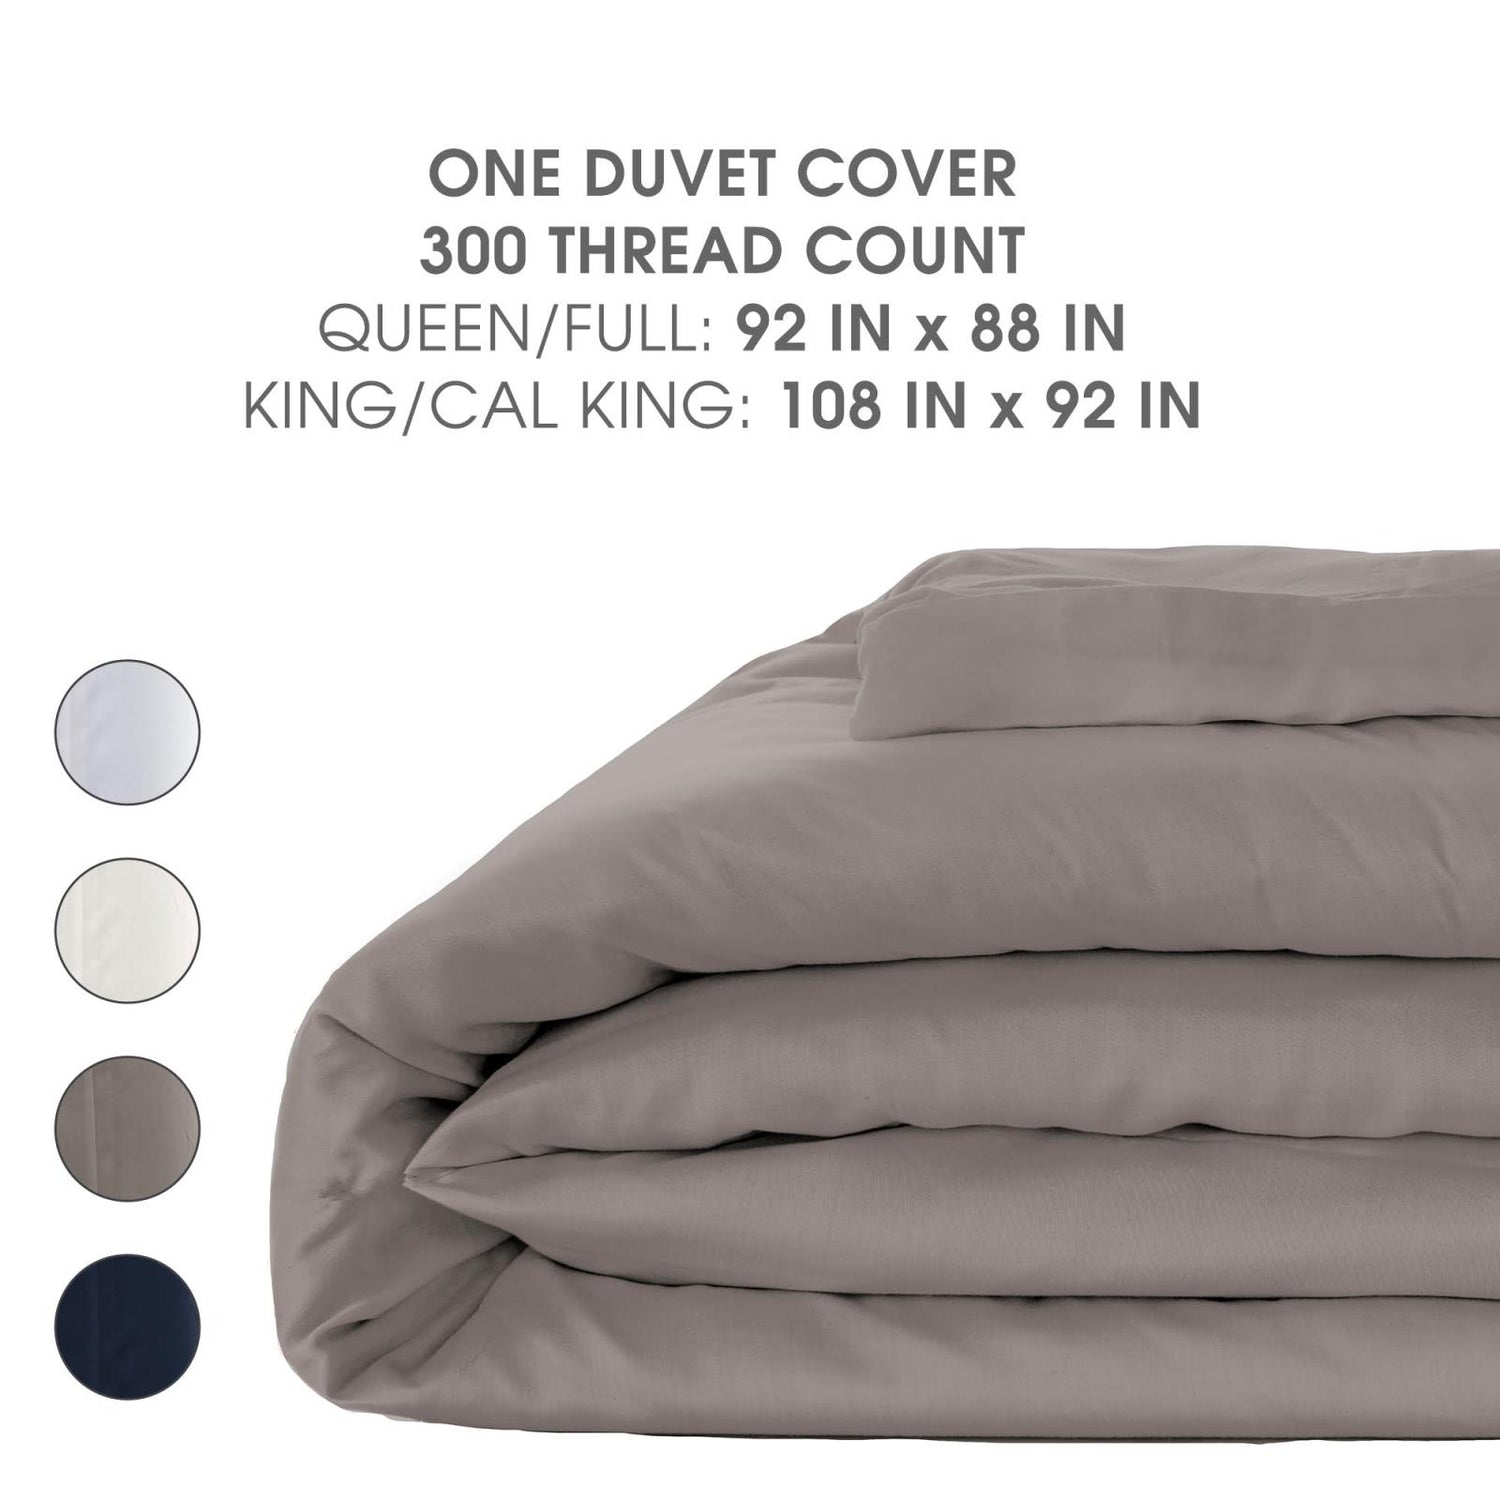 Woven Duvet Cover in Suede Blue